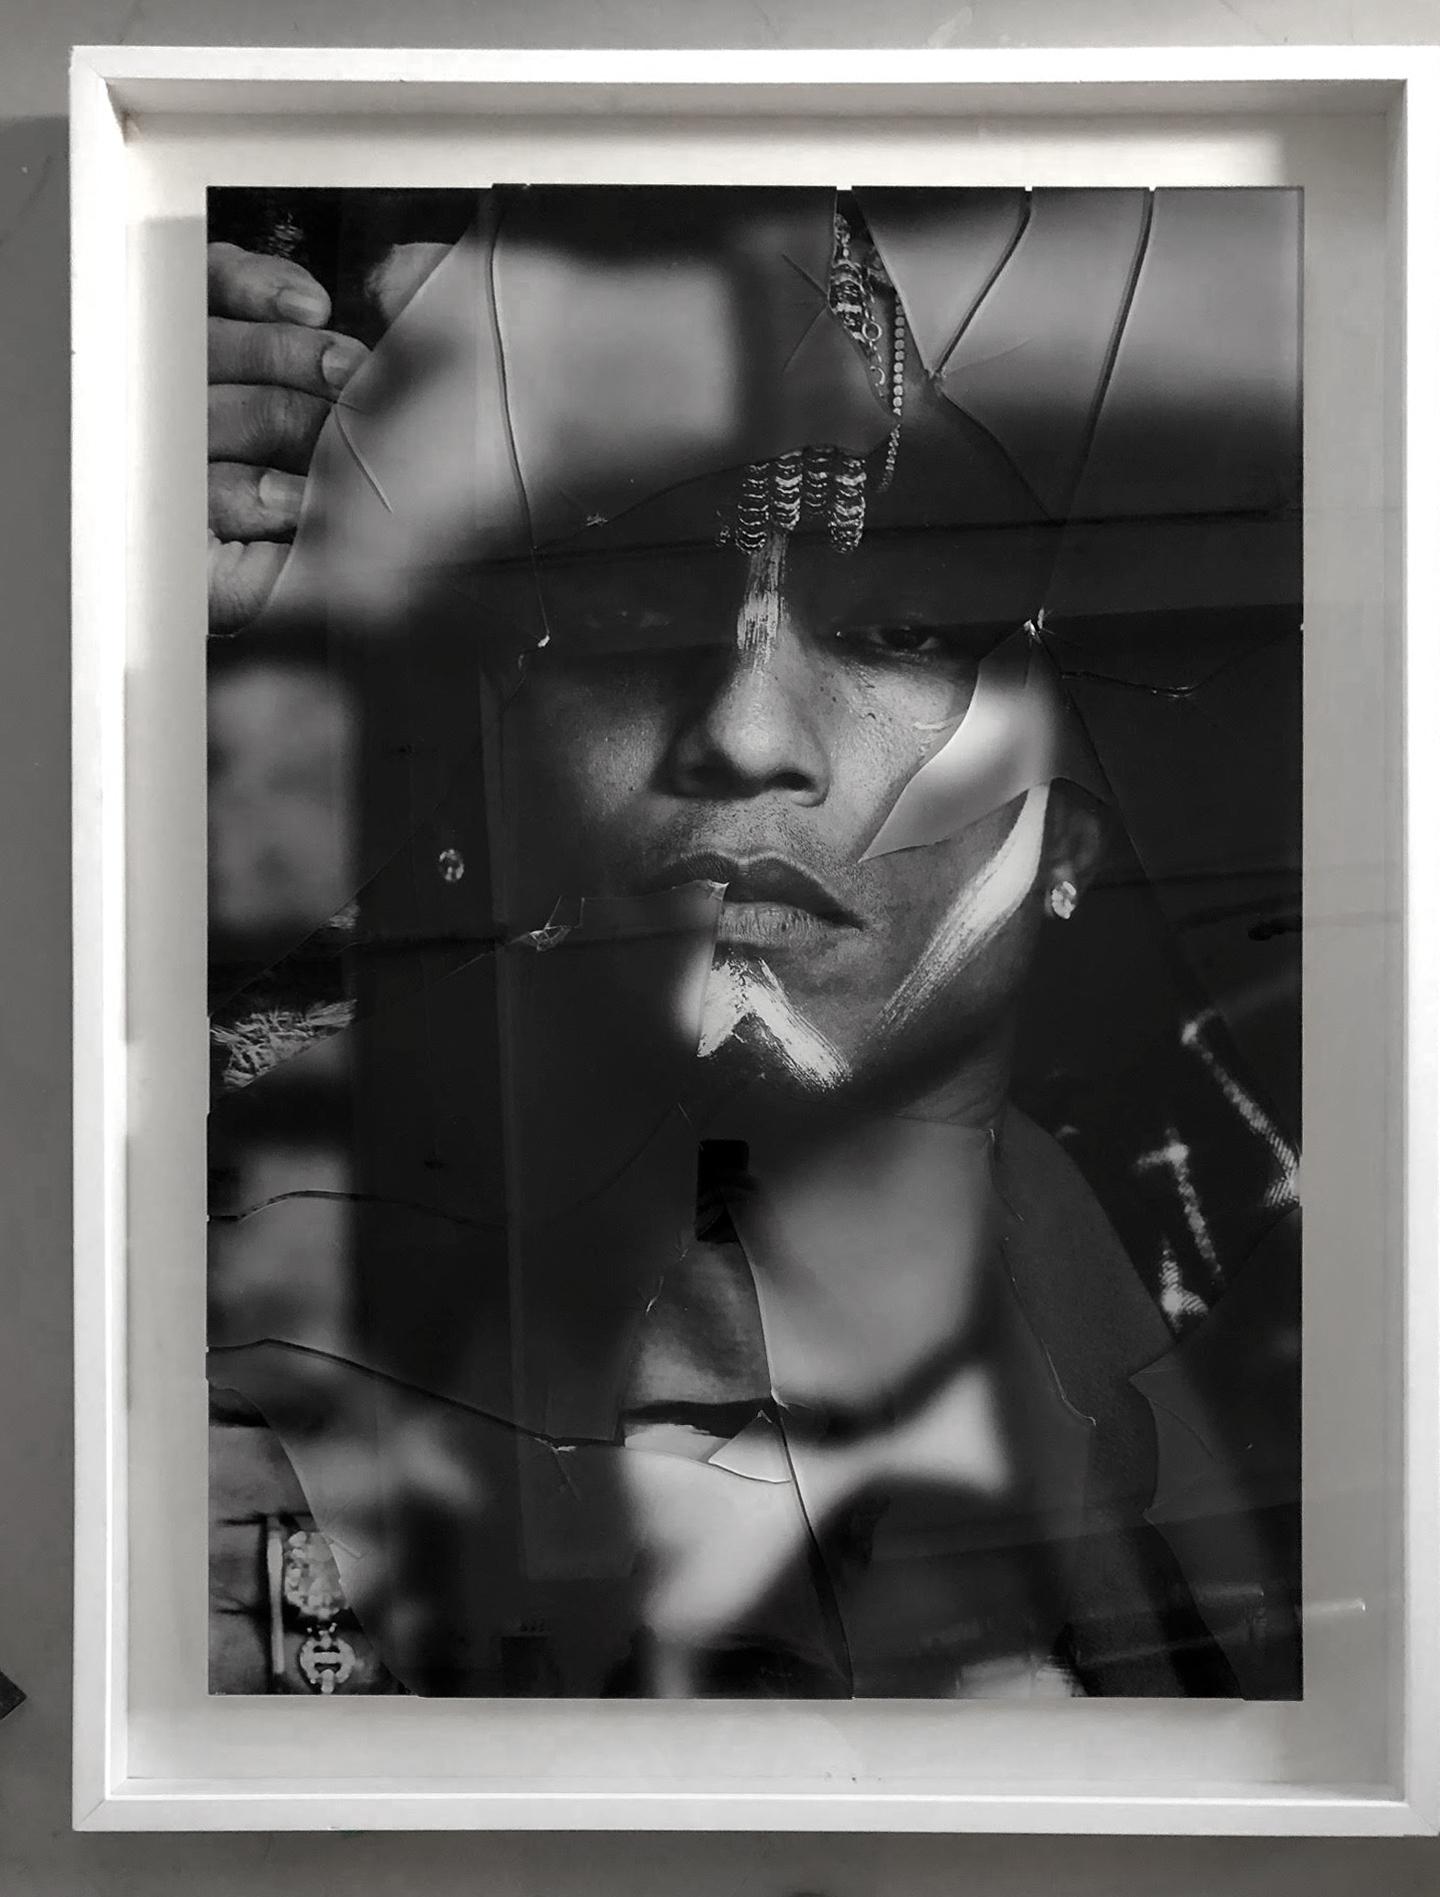 Pharrell Williams #3 and #4, (Diptych) by Hunter & Gatti
Black and White Photography with broken glass on top of the image.
Overall size: 
Image size: 45.2 in. H x 65 in. W
Frame size: 52.5 in. H x 78 in. W x 2 in. D

Individual size: 
Image size: